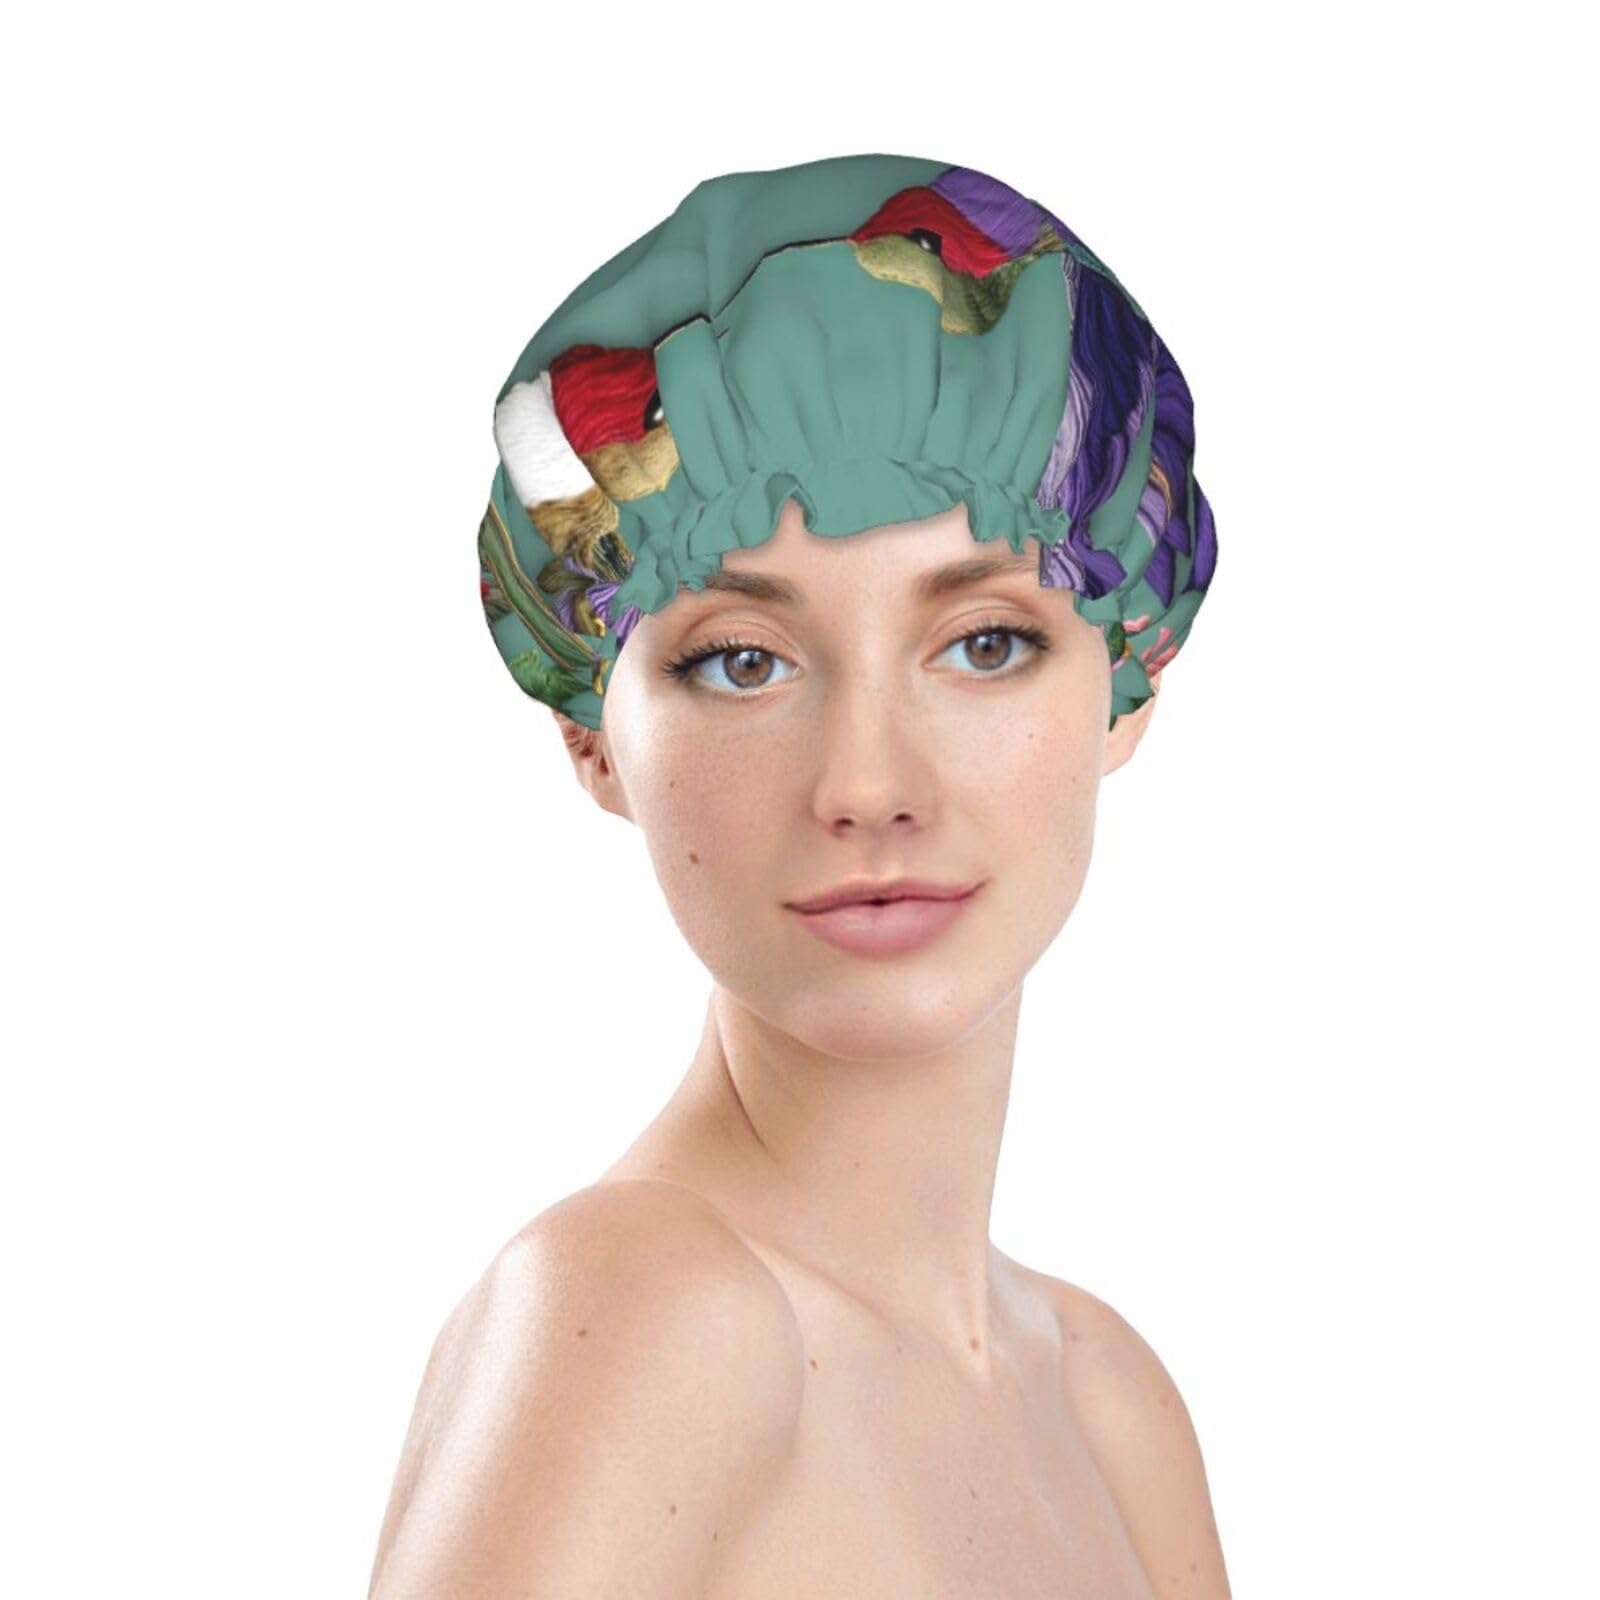 Double Layer Waterproof Shower Cap for Women,Portable Hair Protection for Long Hair,Versatile Bath Accessory Flower Hummingbirds Embroiderys